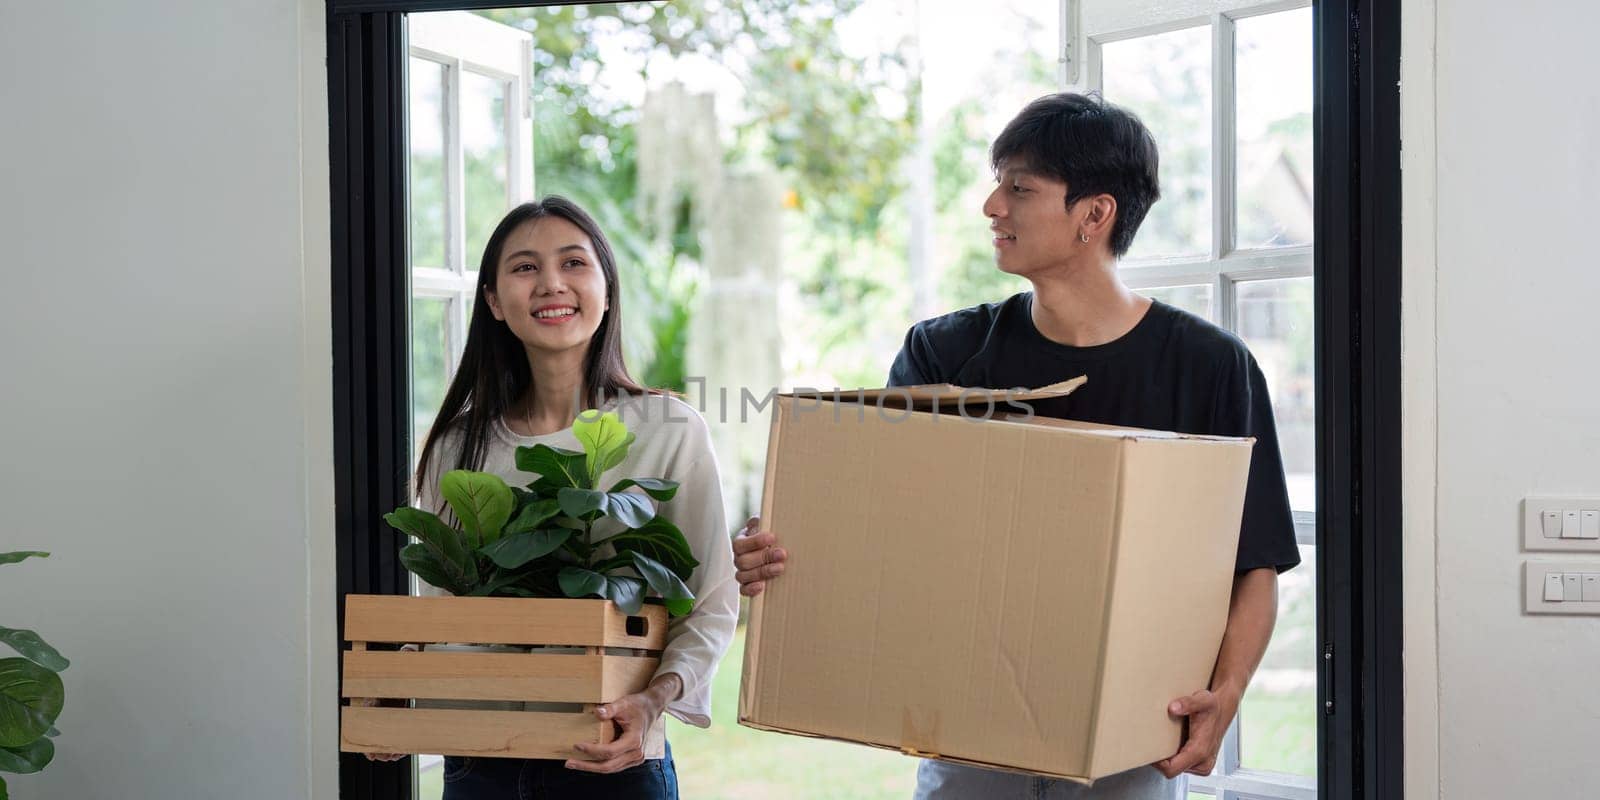 A joyful couple carrying boxes and plants as they move into their new house, symbolizing new beginnings and a fresh start in a modern home.